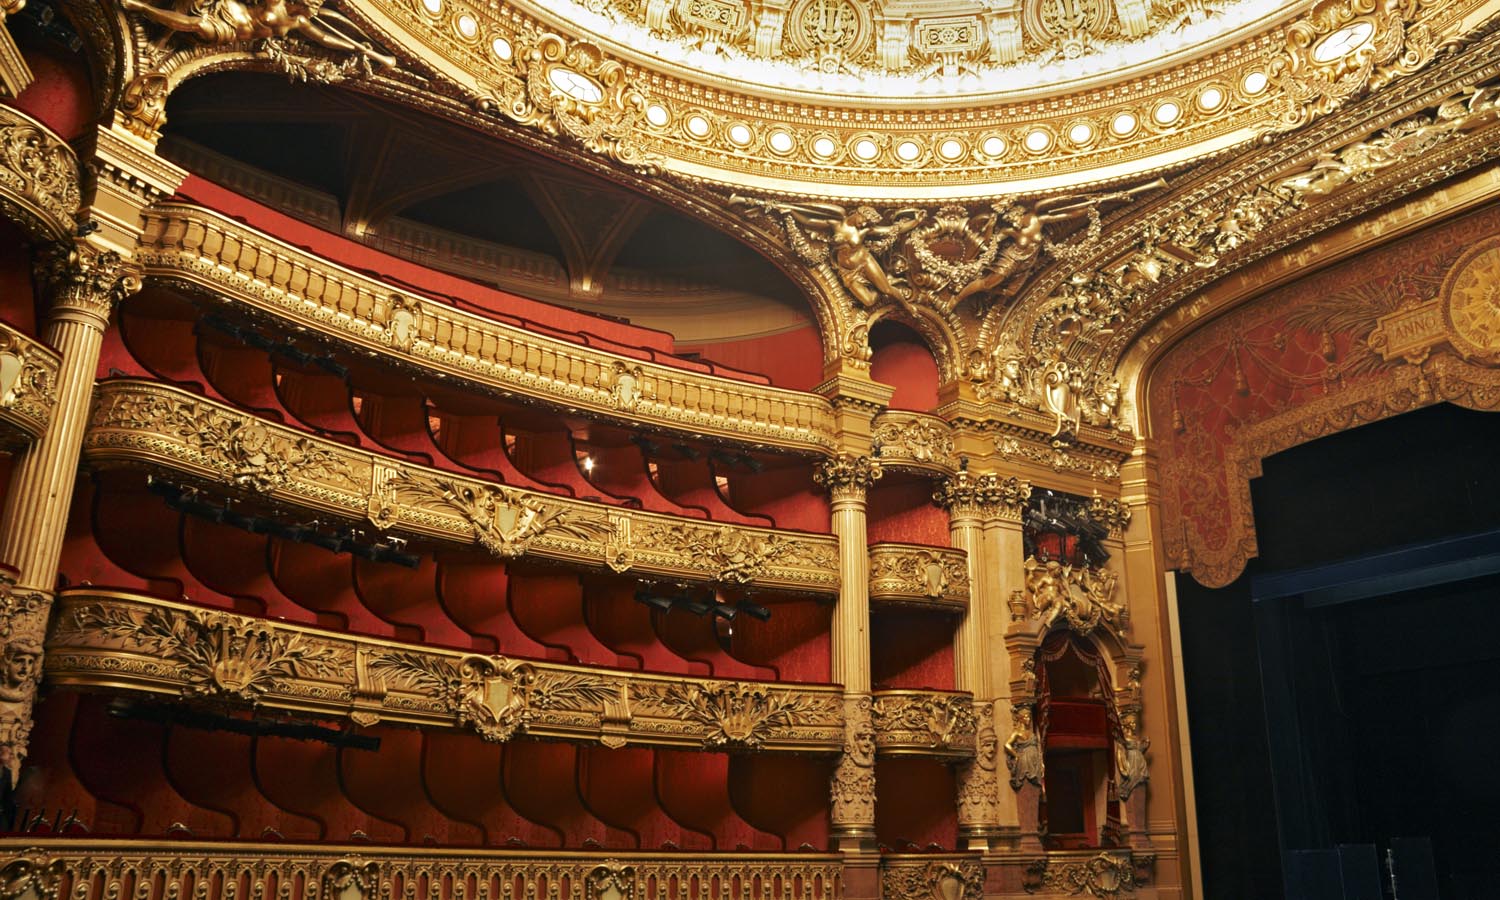 theater interior, view of balcony seating